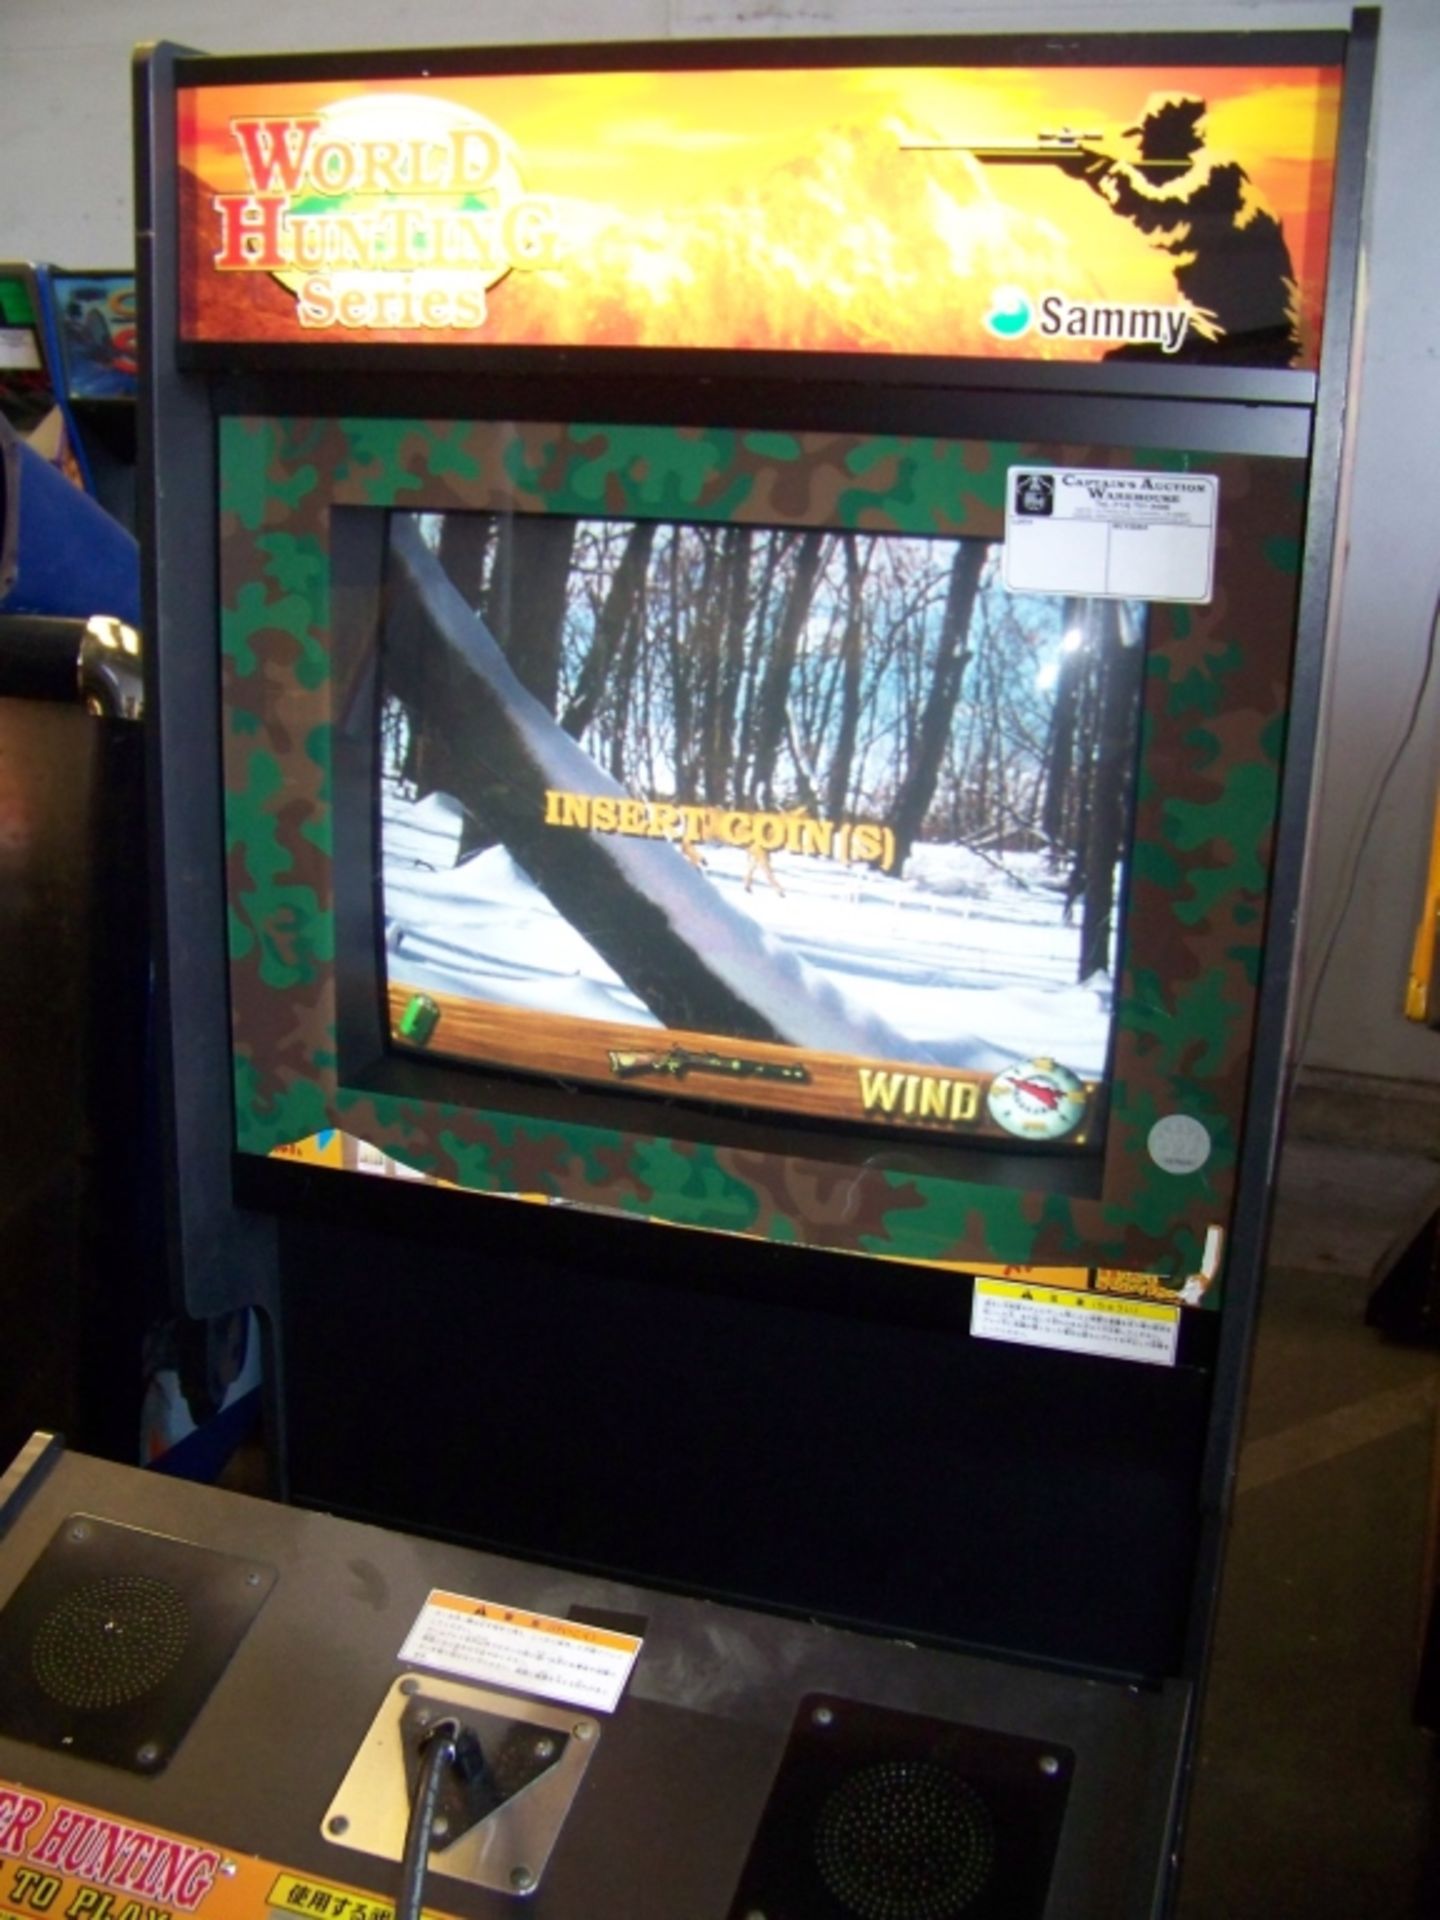 WORLD HUNTING SERIES SHOOTER ARCADE GAME SAMMY JP Item is in used condition. Evidence of wear and - Image 3 of 4